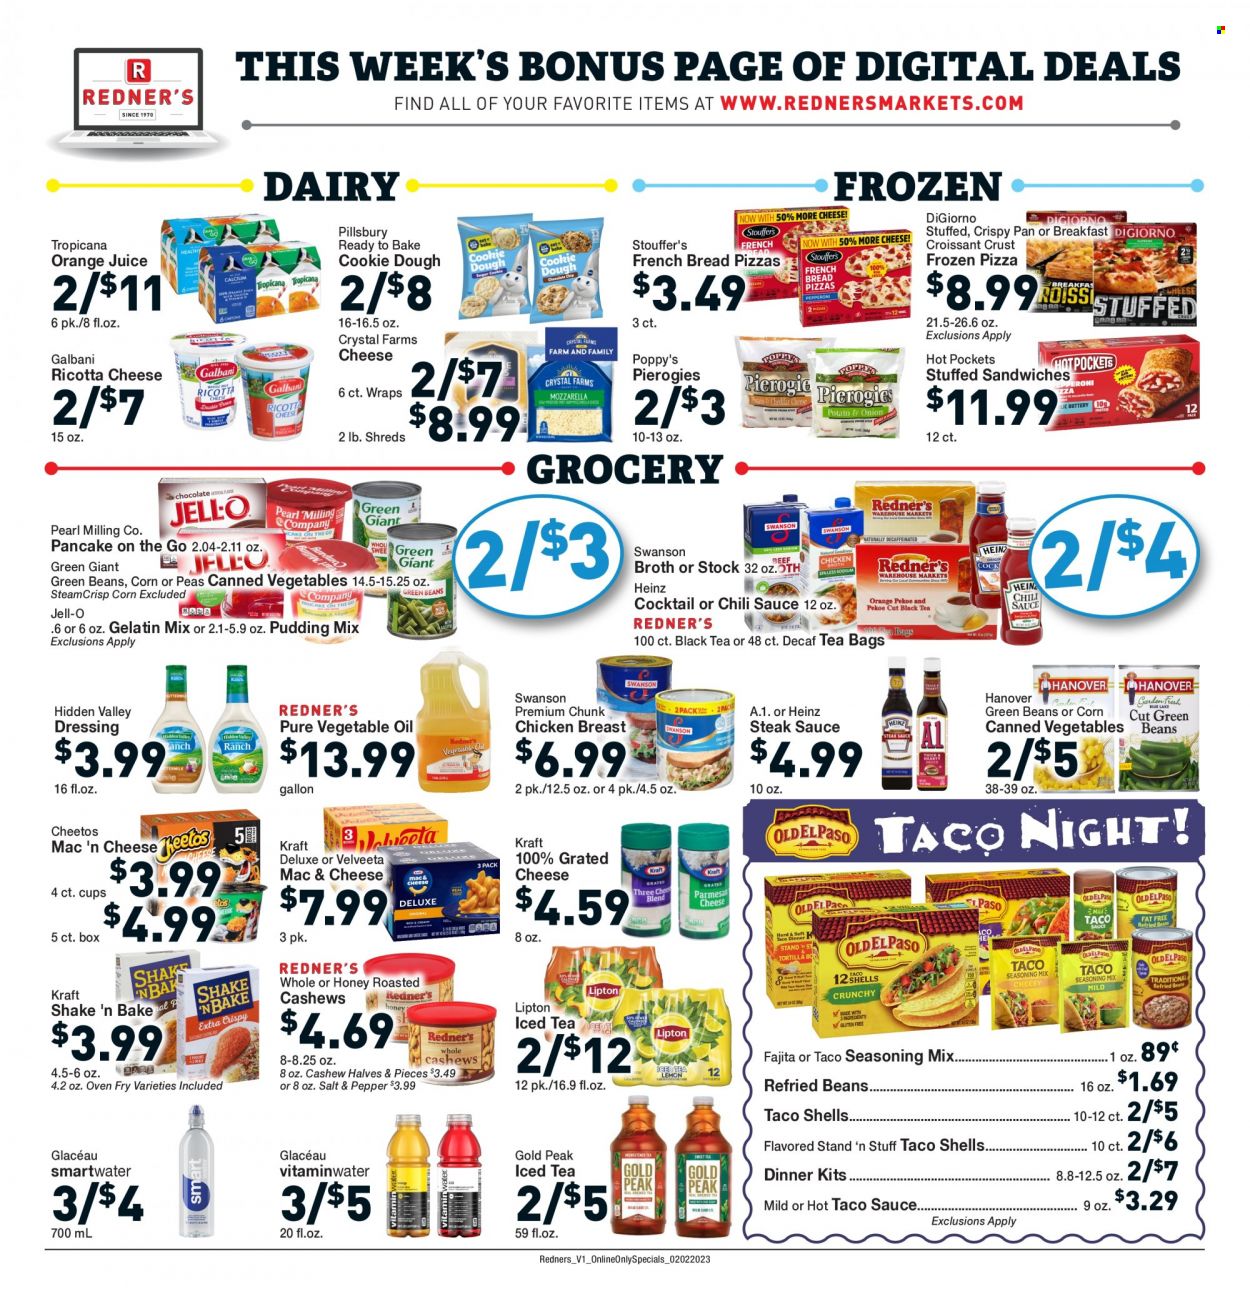 thumbnail - Redner's Markets Flyer - 02/02/2023 - 02/08/2023 - Sales products - bread, wraps, french bread, corn, green beans, peas, hot pocket, pizza, pancakes, Pillsbury, dinner kit, Kraft®, ricotta, grated cheese, Galbani, pudding, shake, Stouffer's, cookie dough, Cheetos, Jell-O, broth, refried beans, Heinz, canned vegetables, spice, steak sauce, taco sauce, chilli sauce, dressing, vegetable oil, oil, cashews, orange juice, juice, Lipton, ice tea, Smartwater, chicken breasts, steak, bag, pan, cup. Page 7.